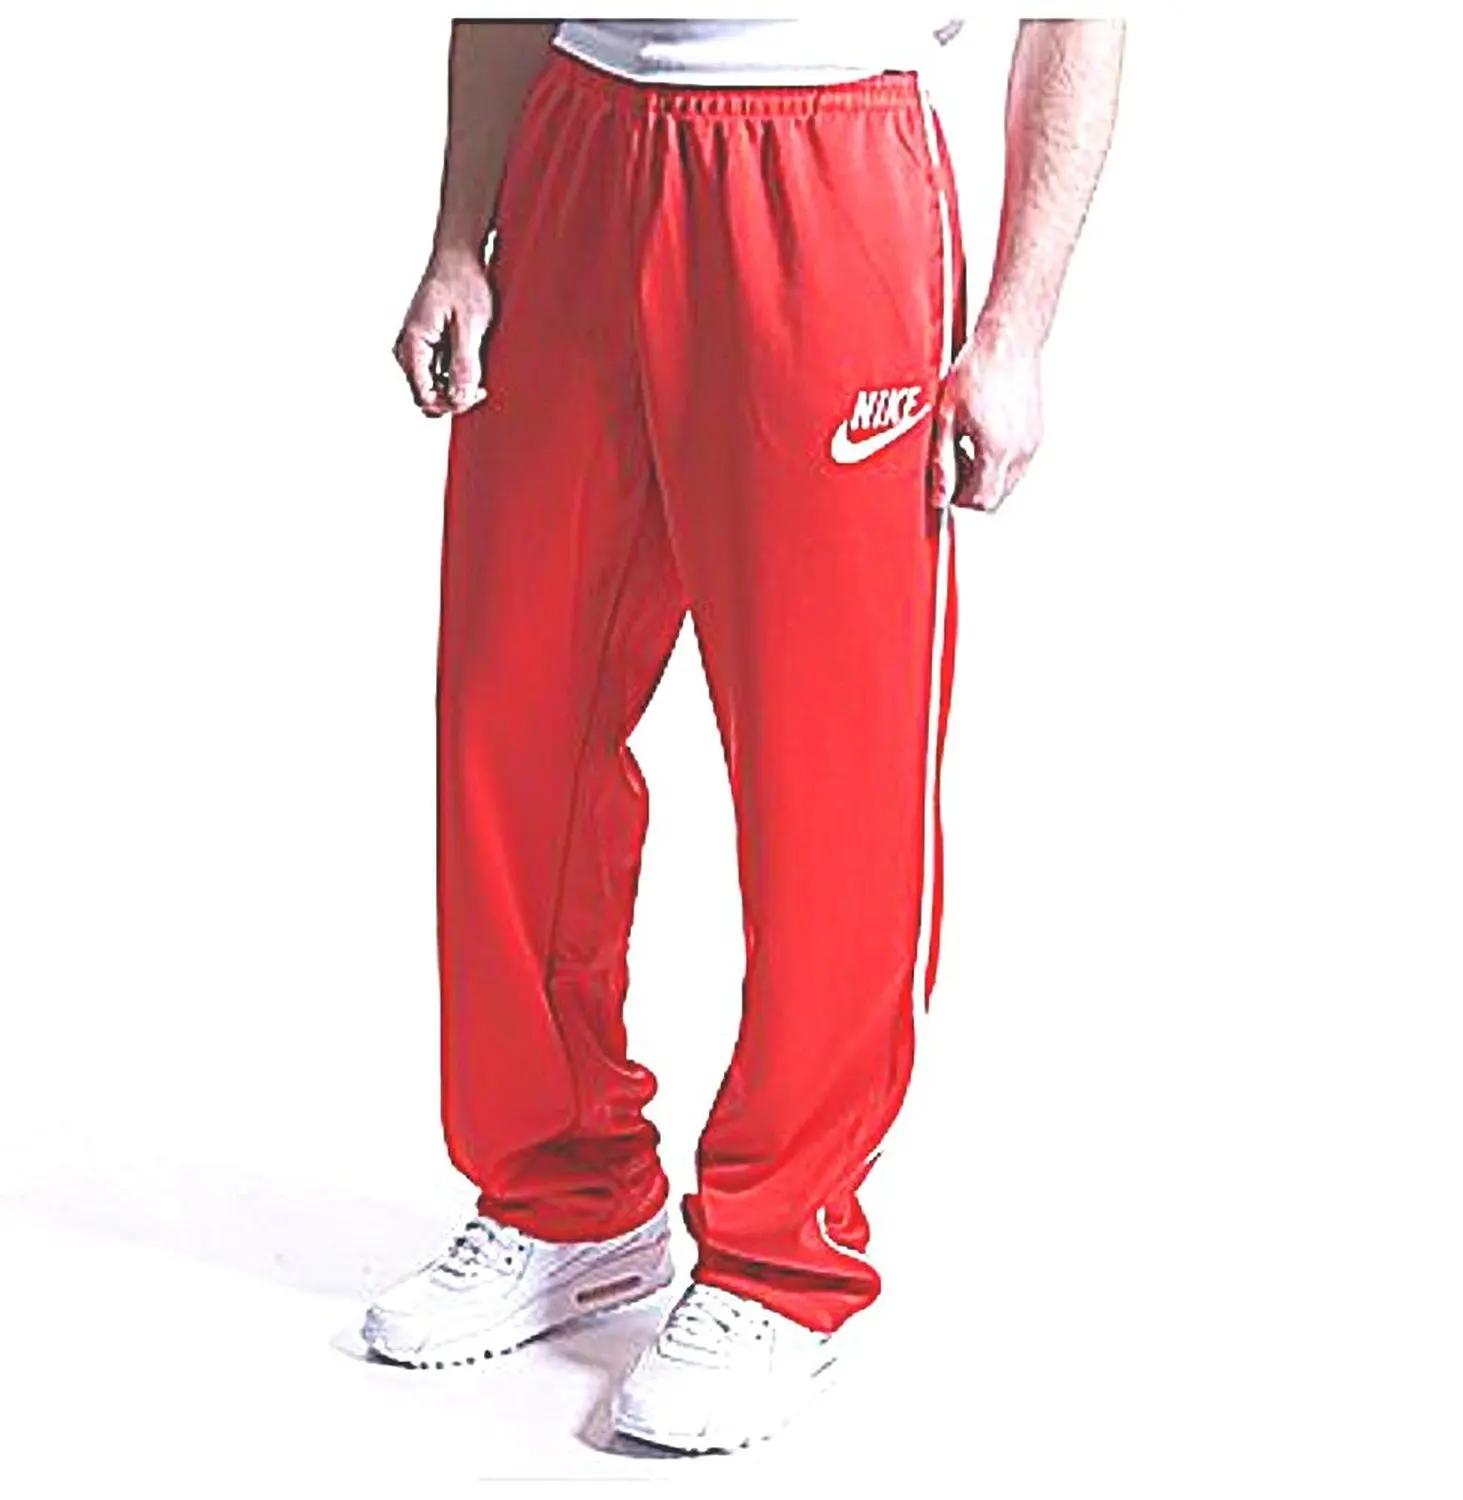 white and red nike pants